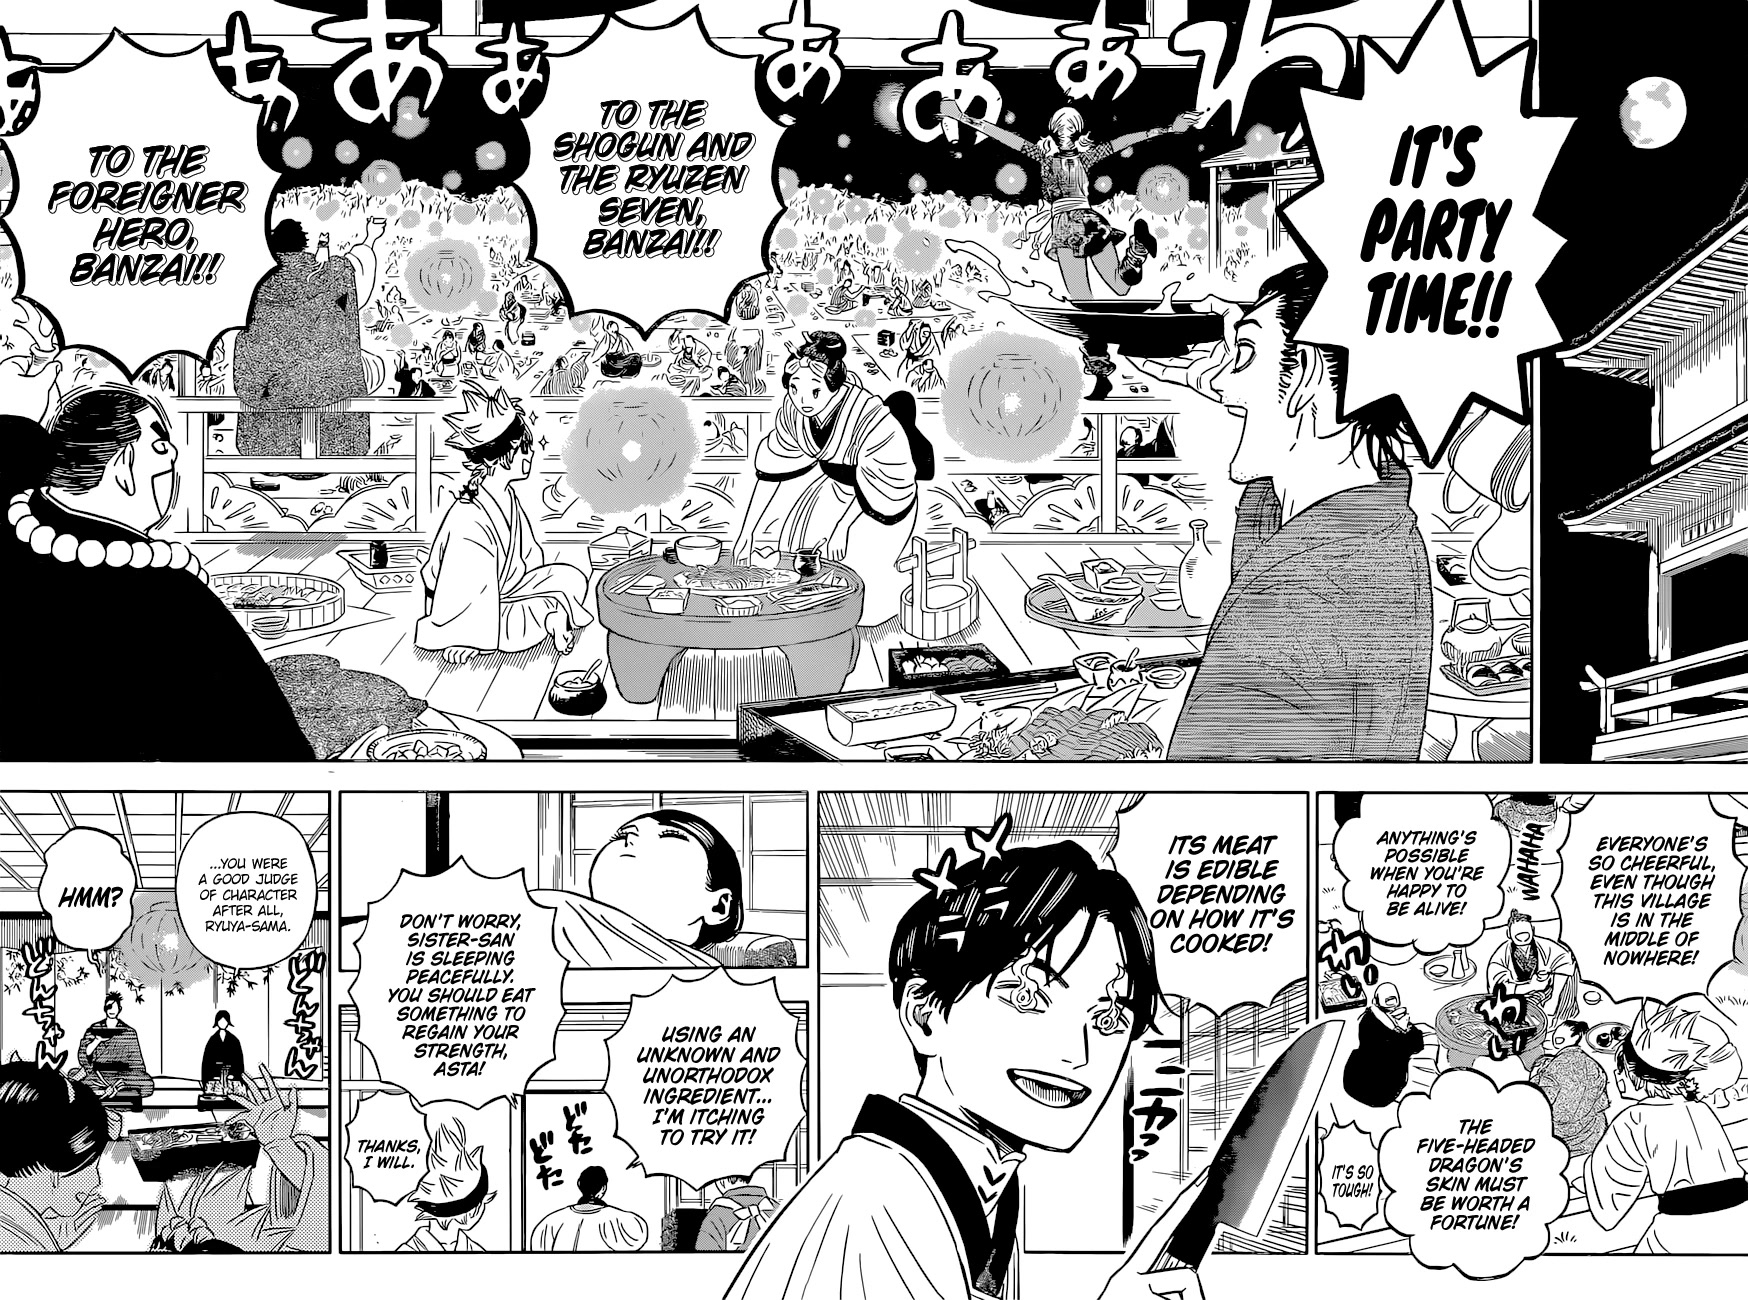 Black Clover, Chapter 353 The Party